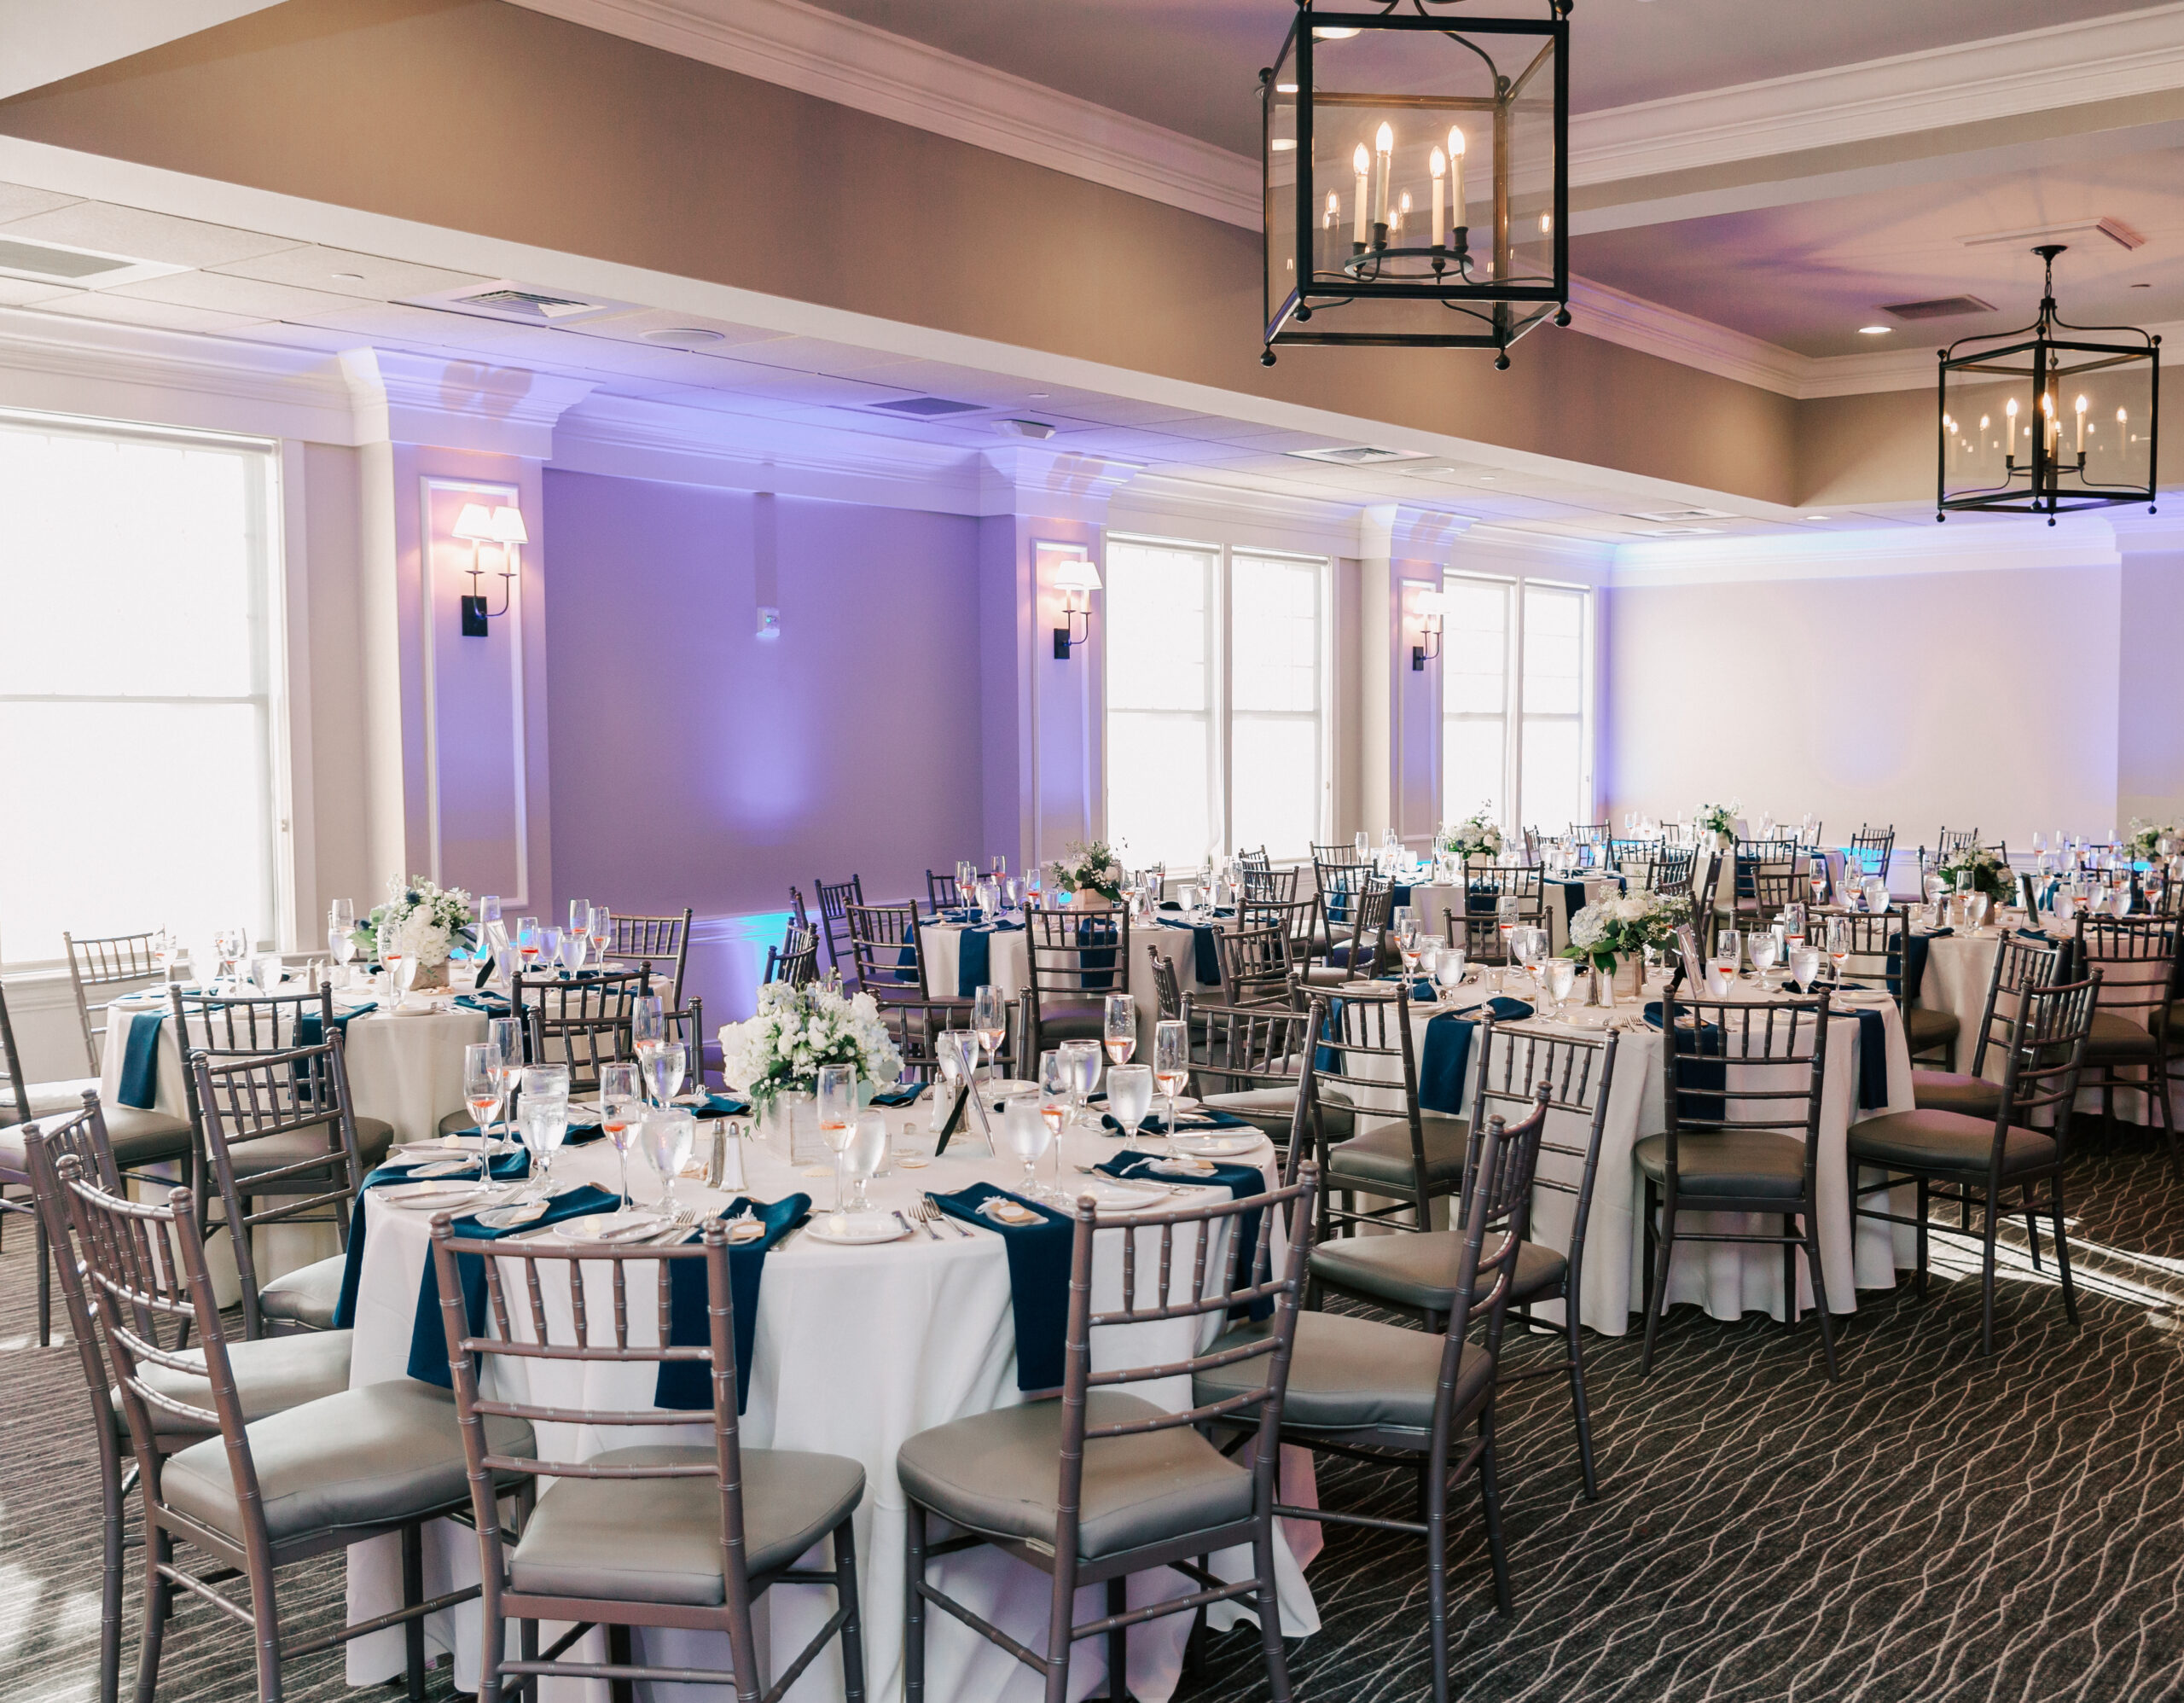 The reception room at Harbor Lights, a Rhode Island wedding venue in Warwick, decorated for a wedding